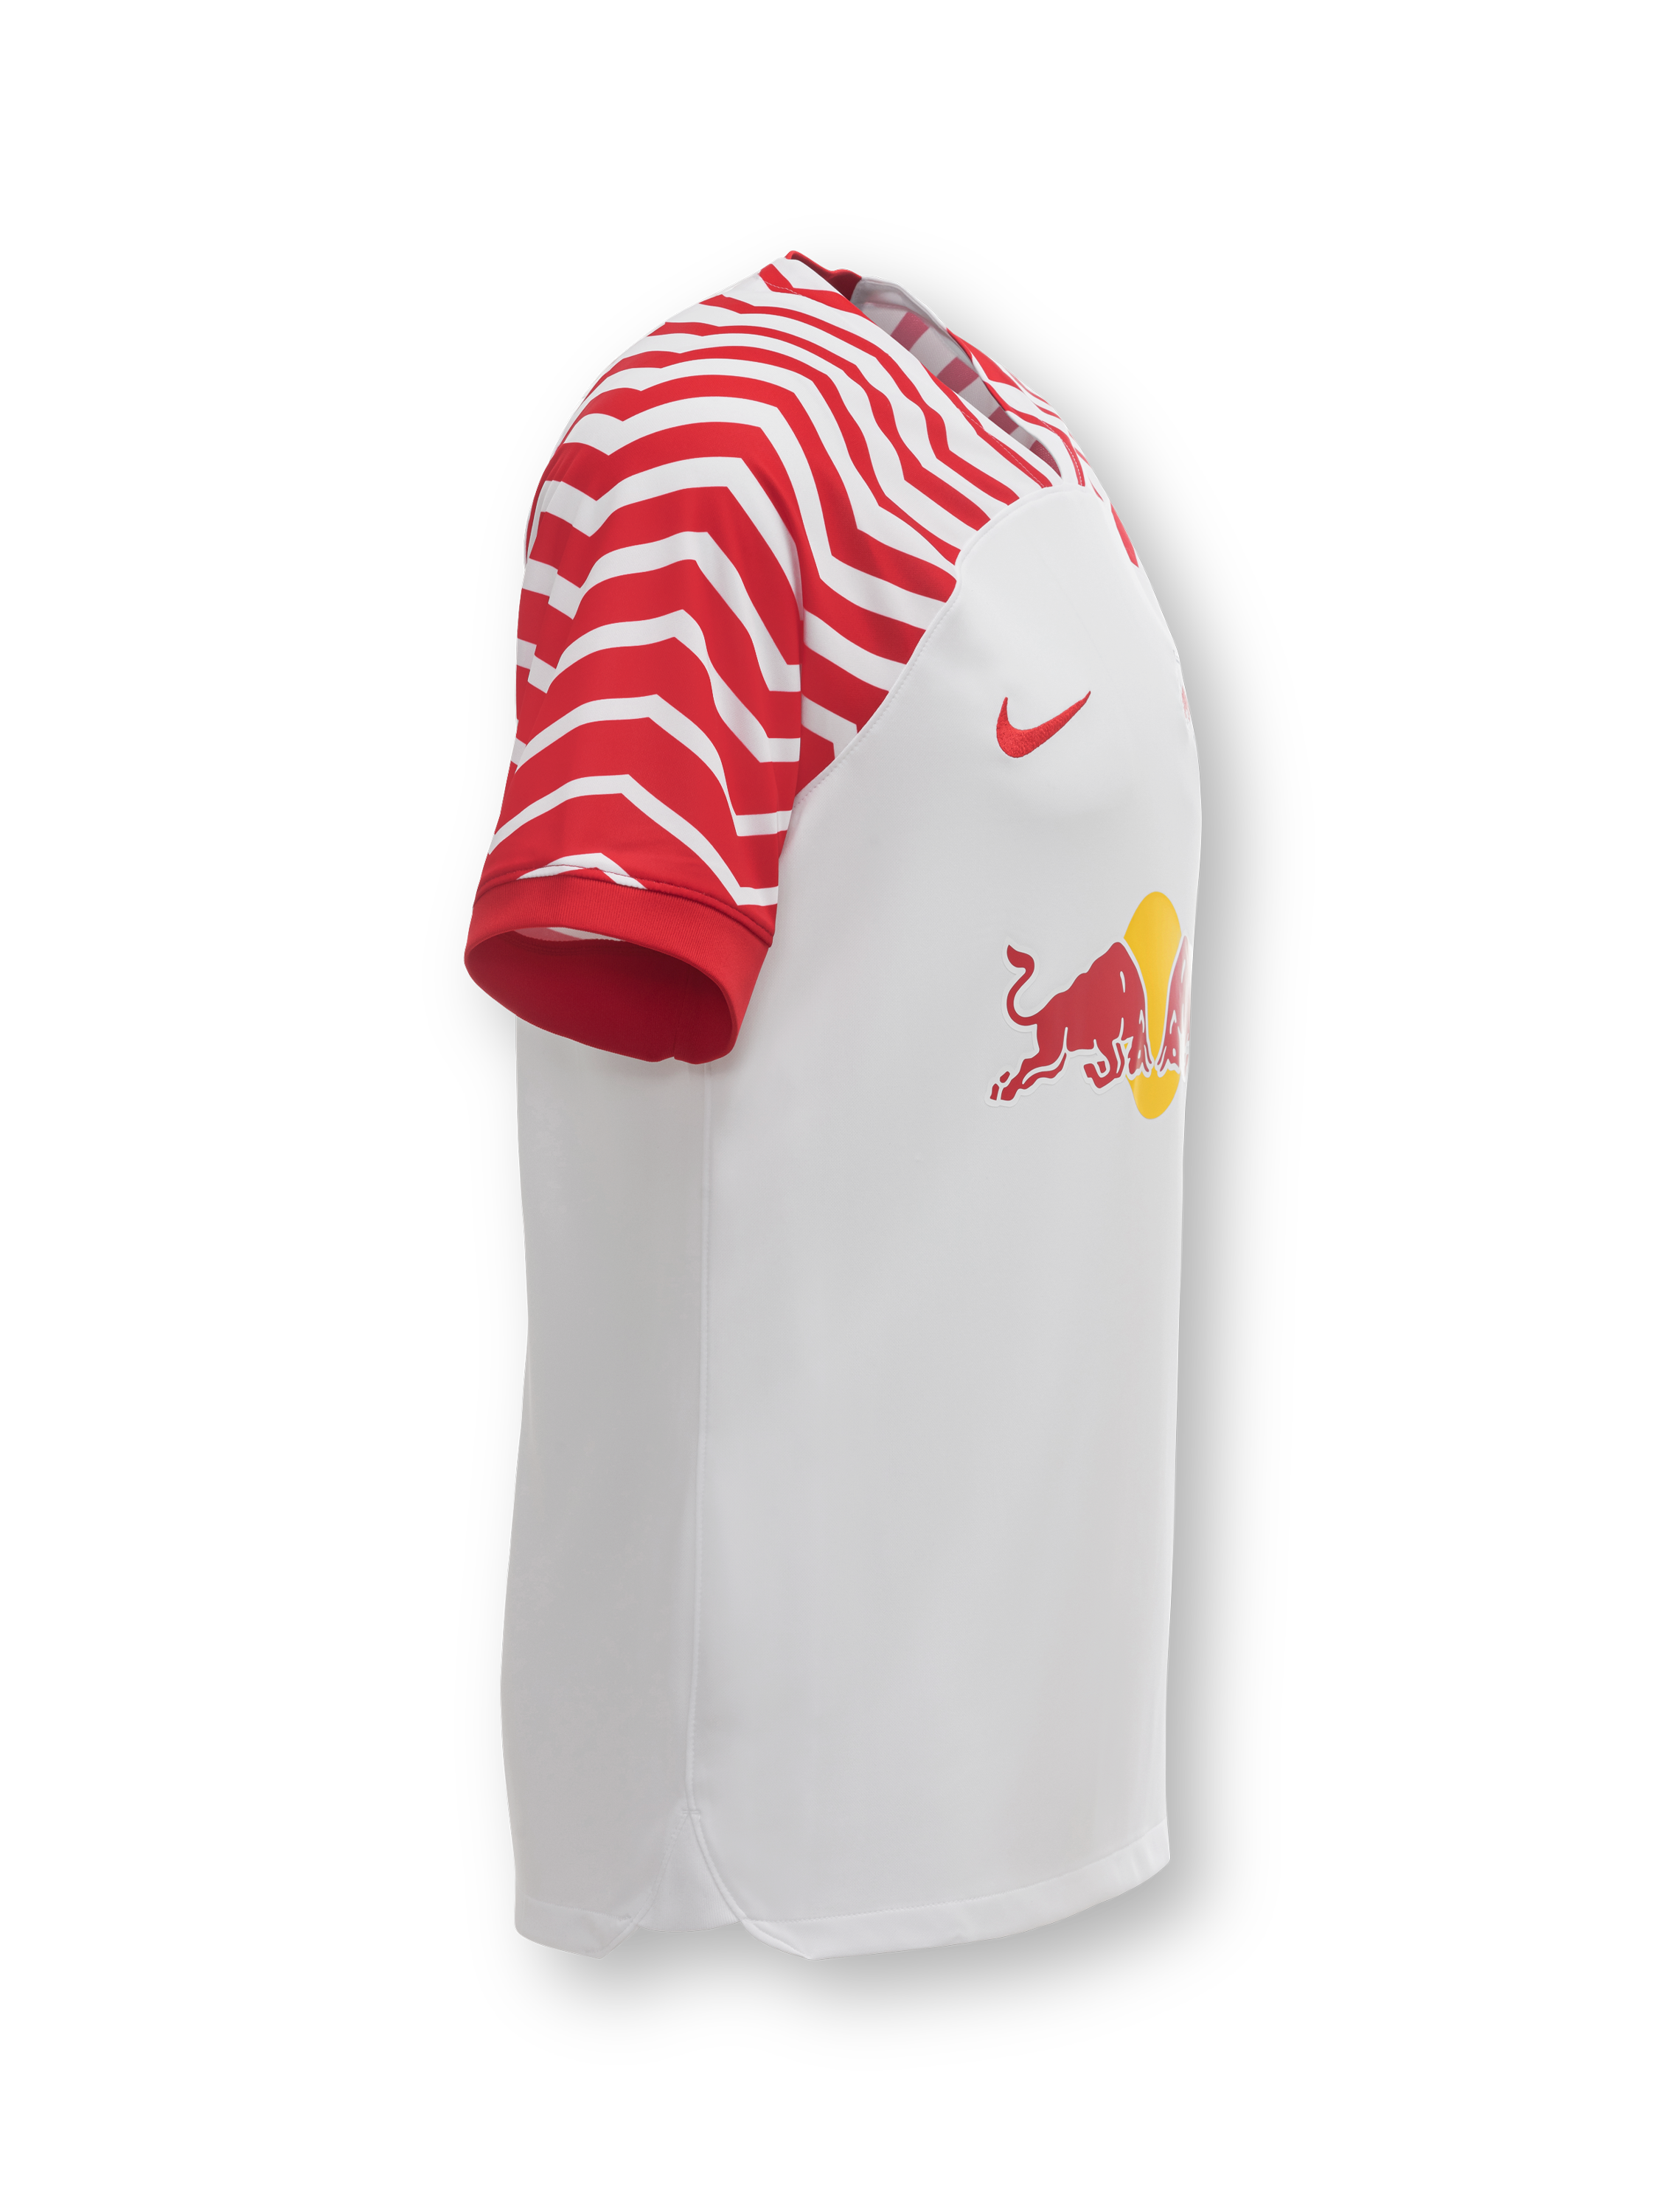 RB Leipzig Shop: RBL Nike Home Jersey 22/23